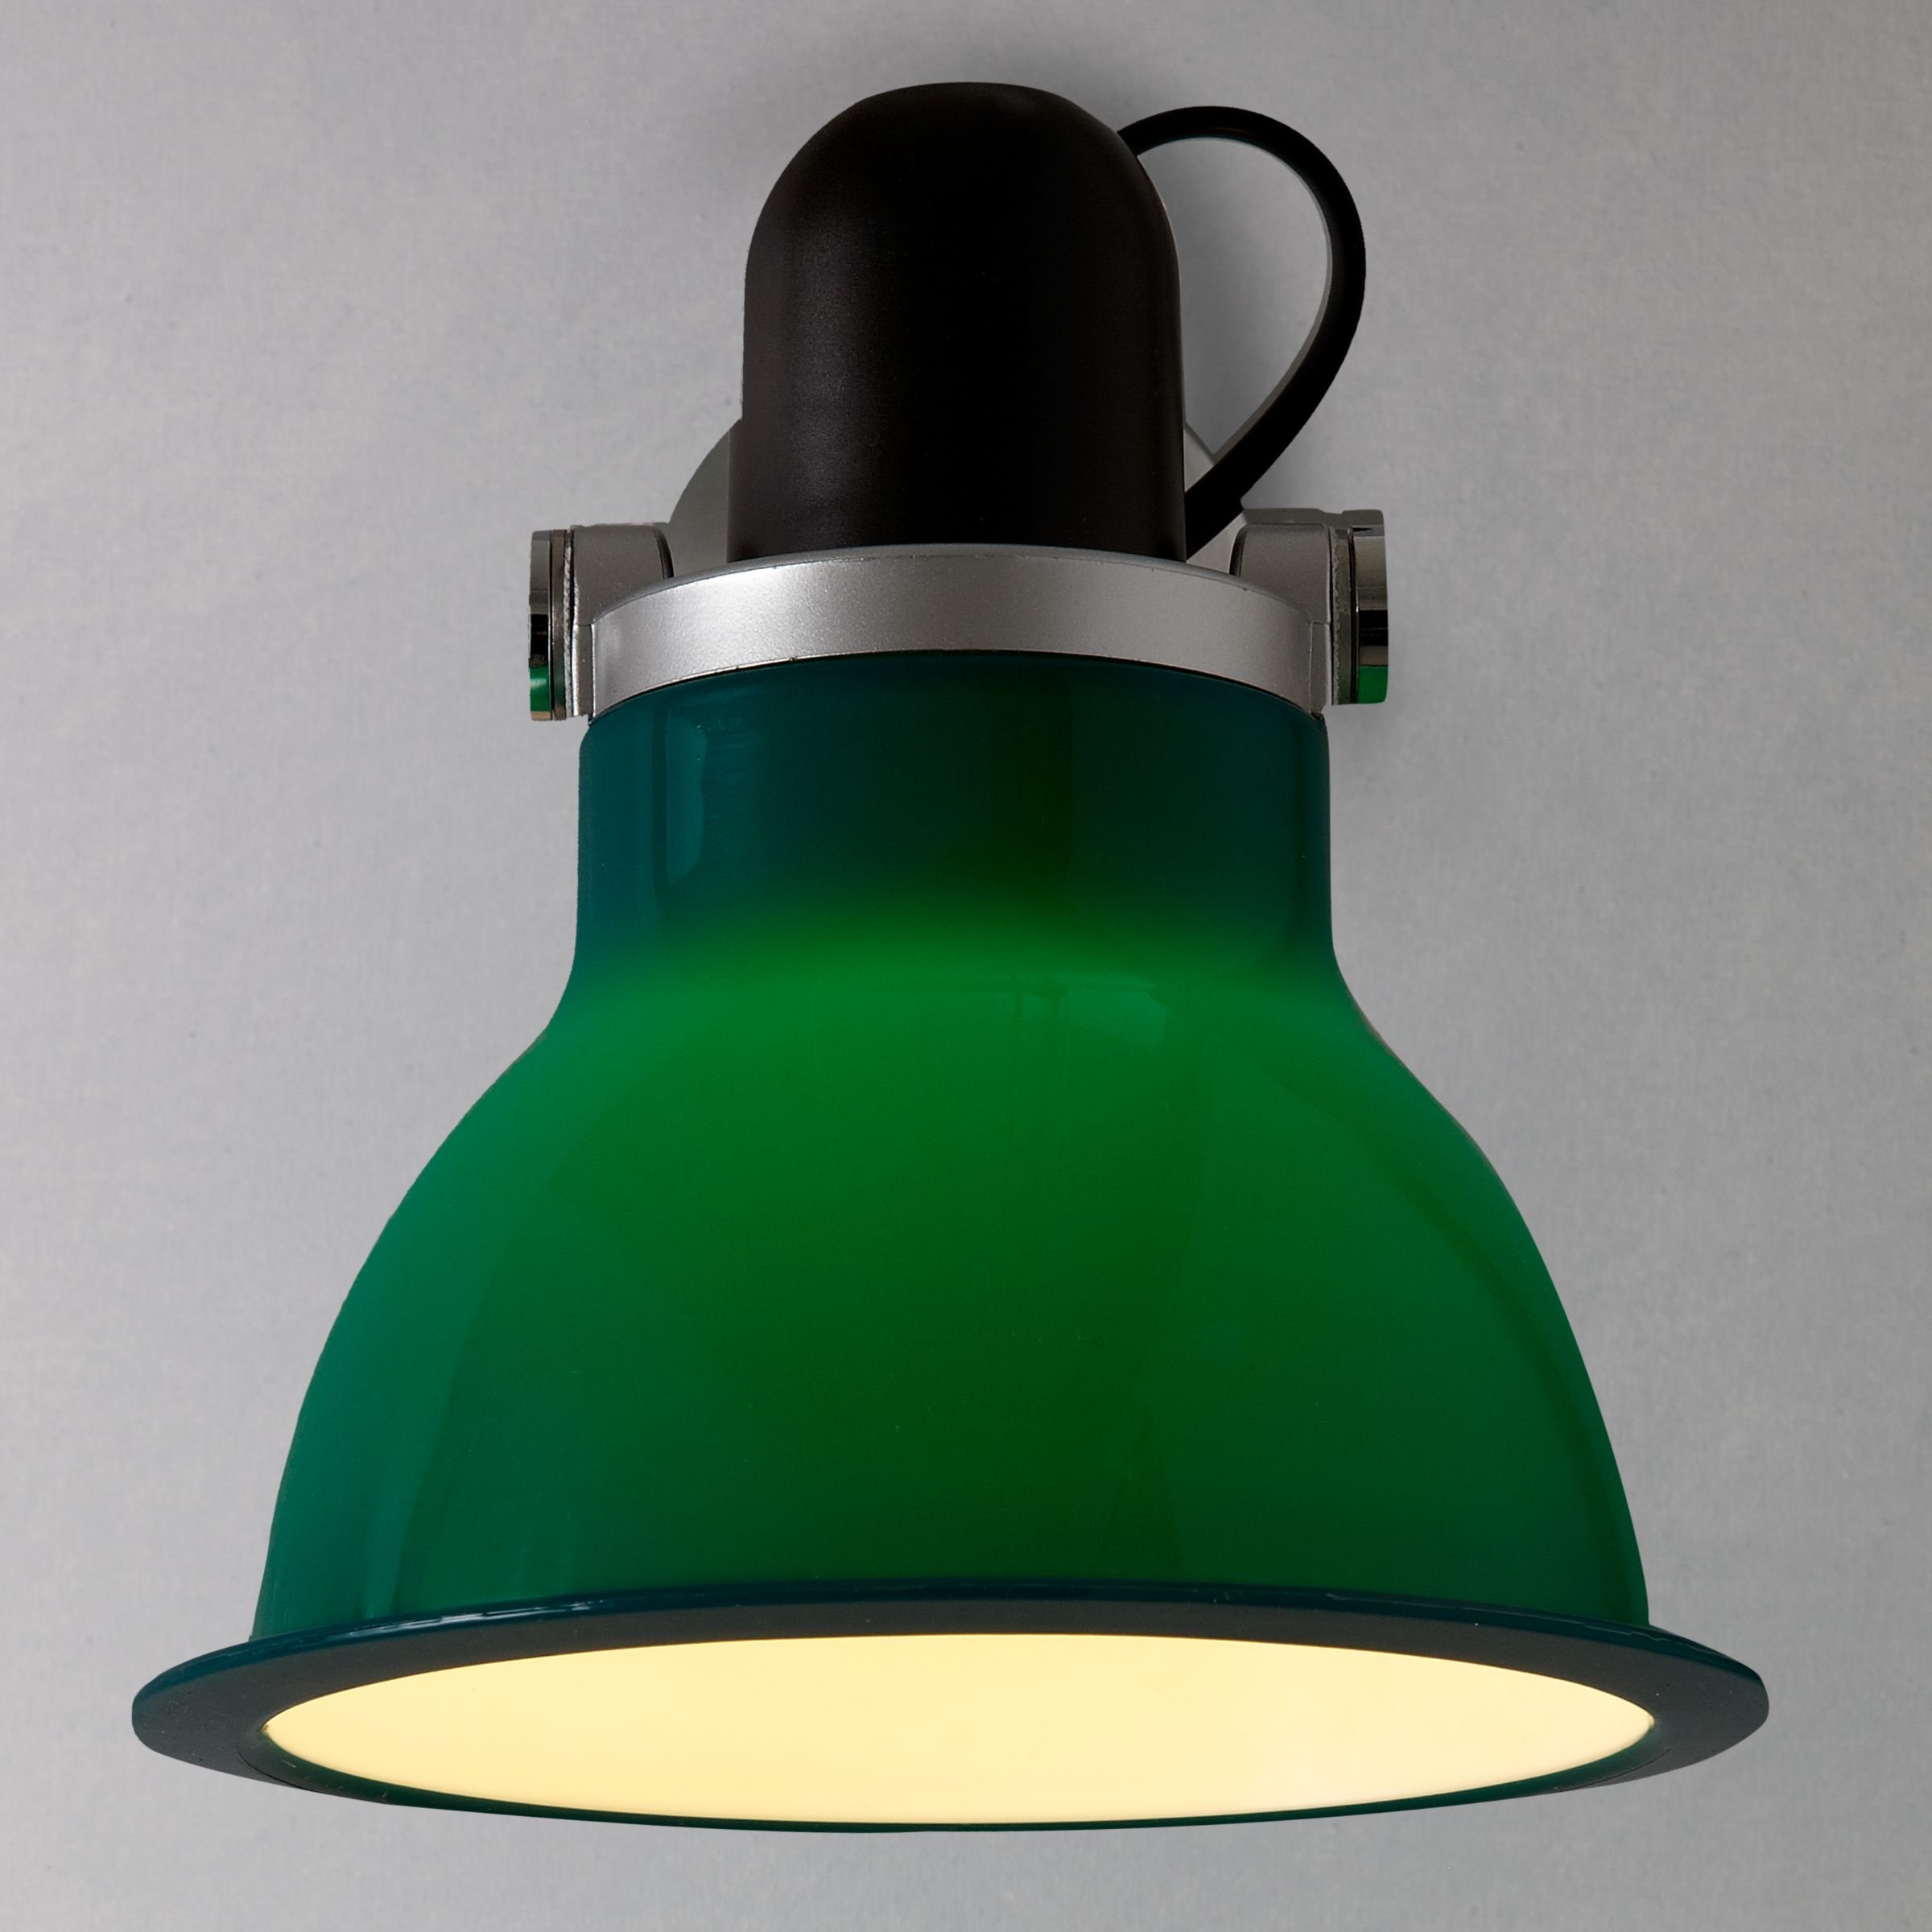 Anglepoise Type 1228 Wall Light, Green